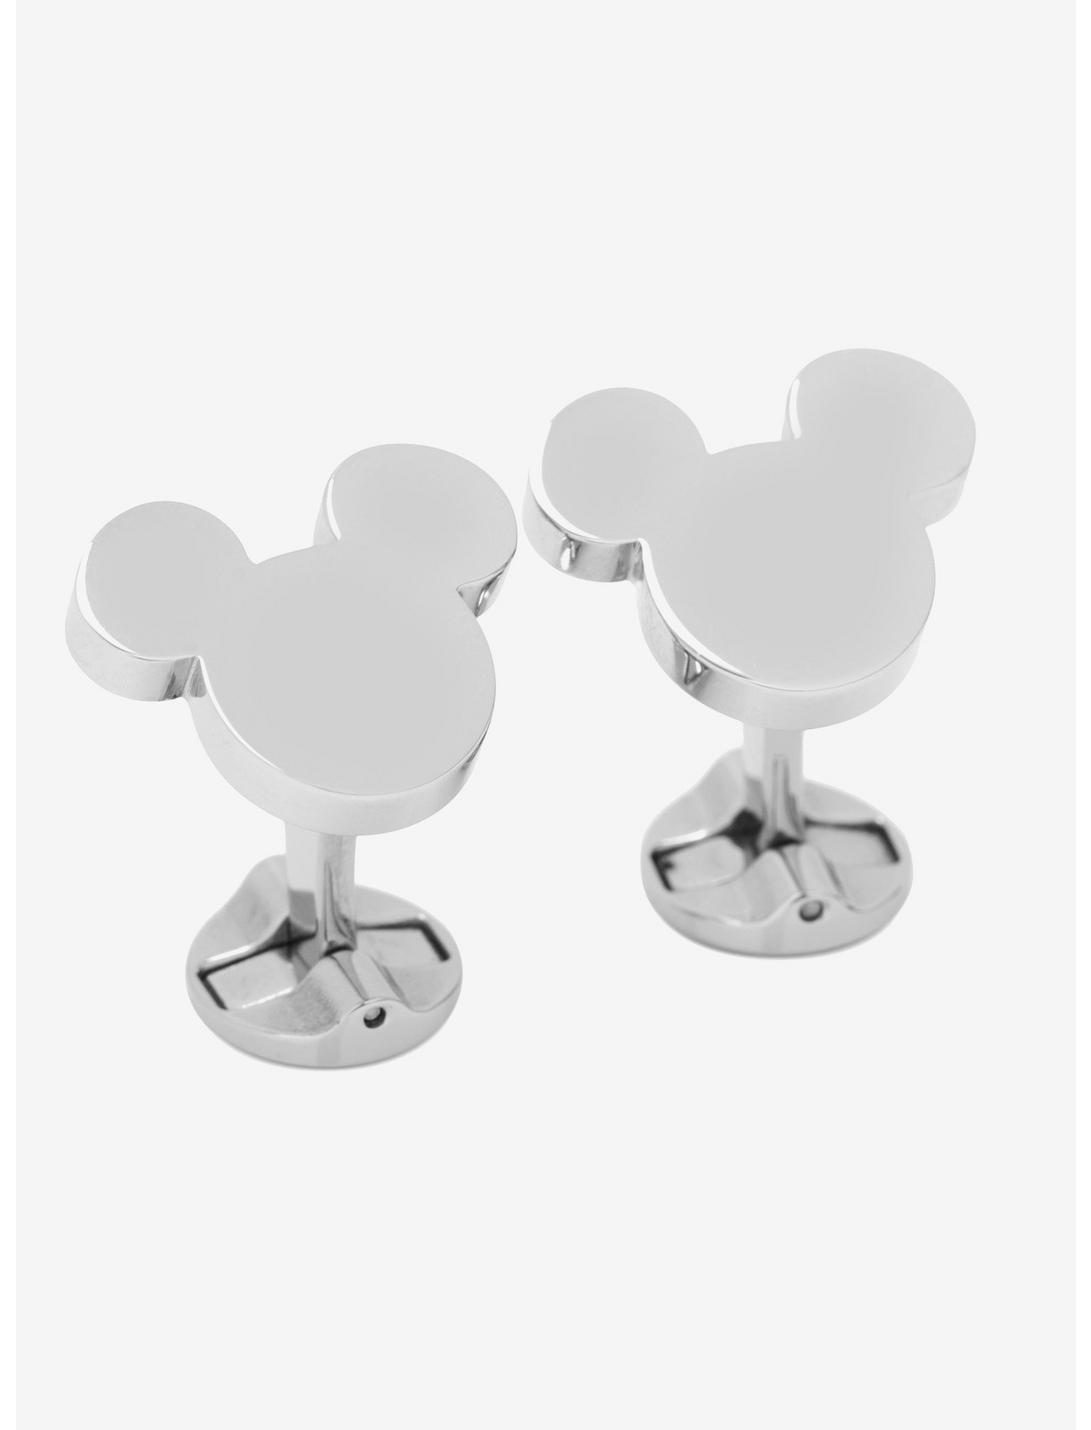 Disney Mickey Mouse Silhouette Stainless Steel Cufflinks, , hi-res